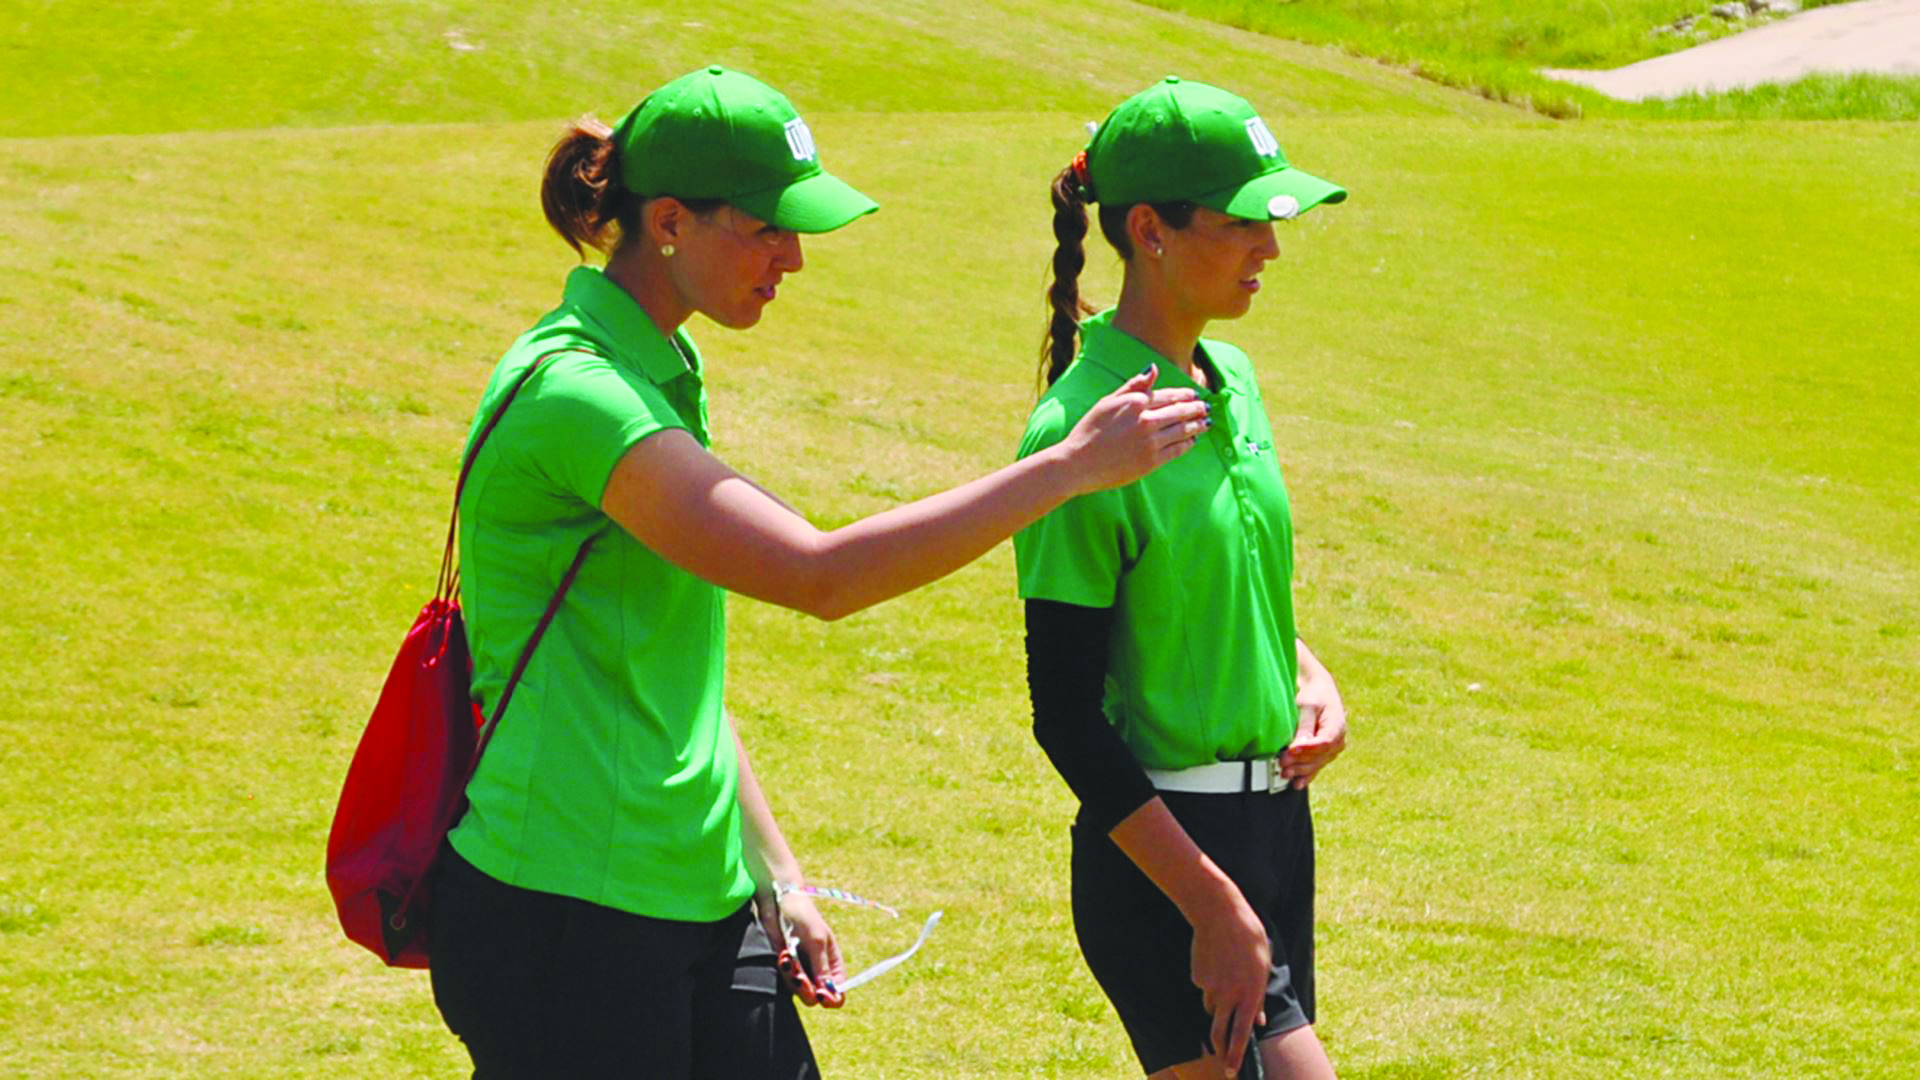 Golf shows strong presence at conference